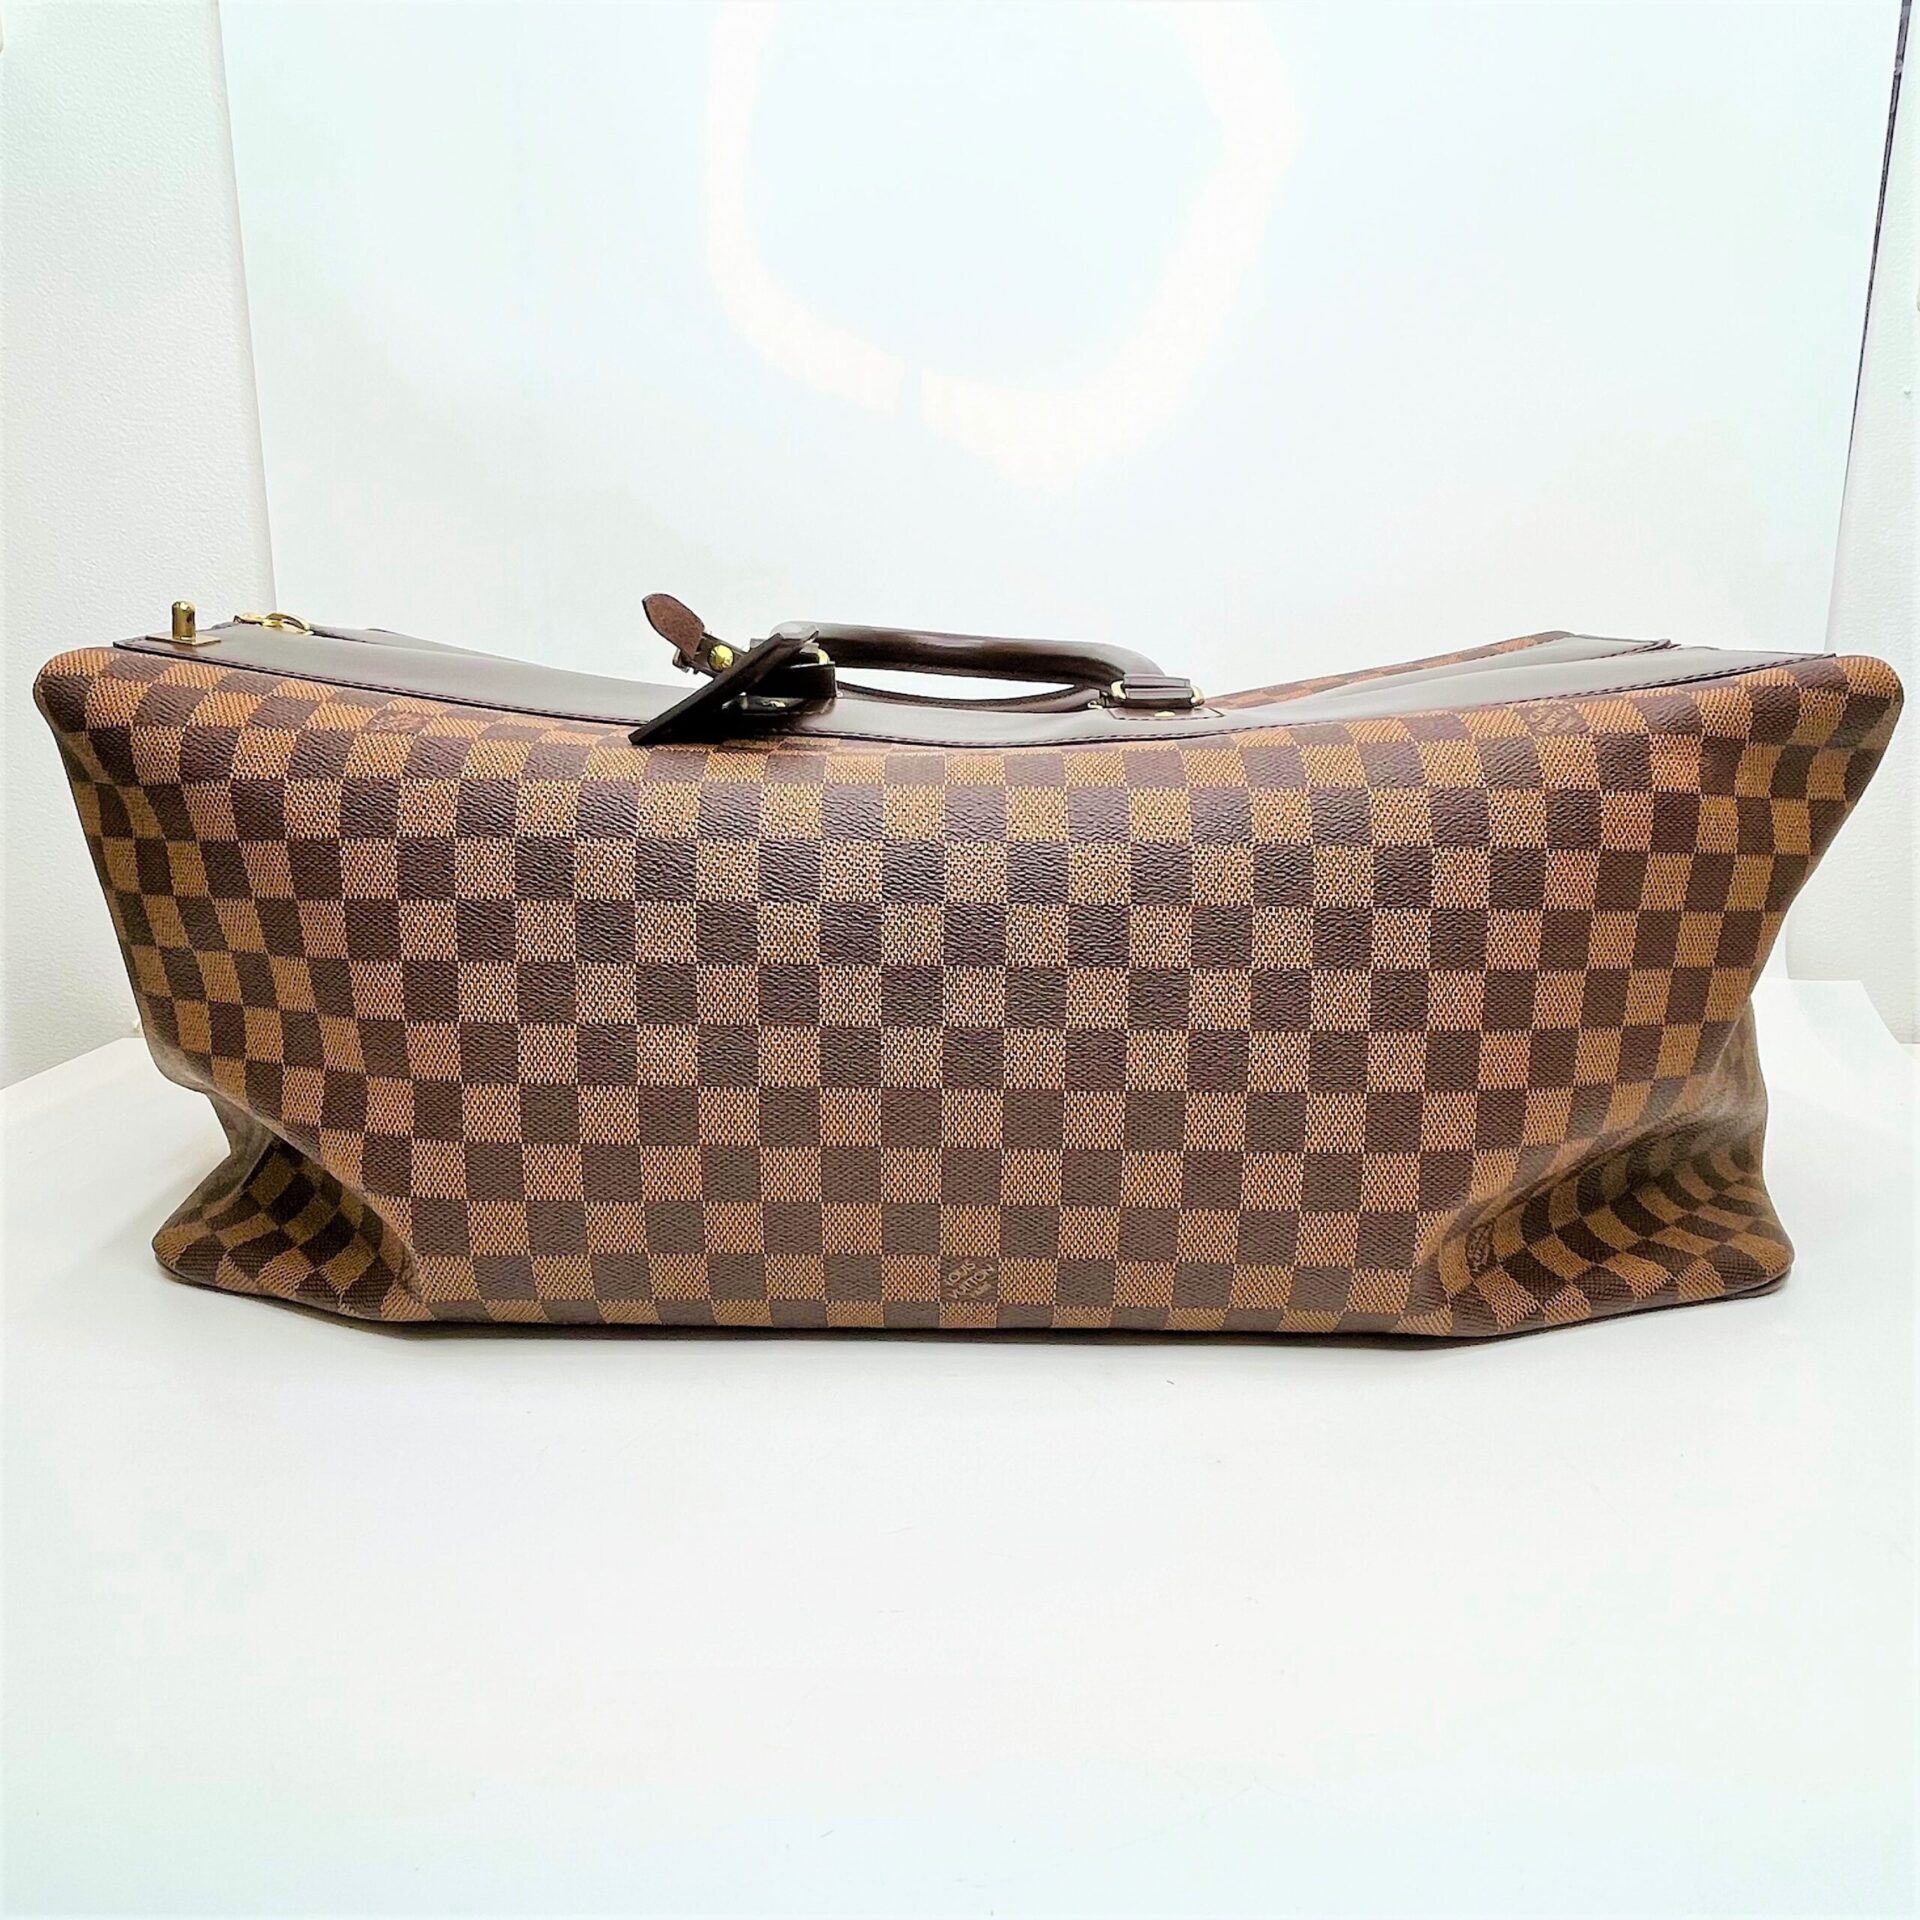 LOUIS VUITTON グリニッジGM N41155 ダミエ ルイヴィトン - 旅行用 